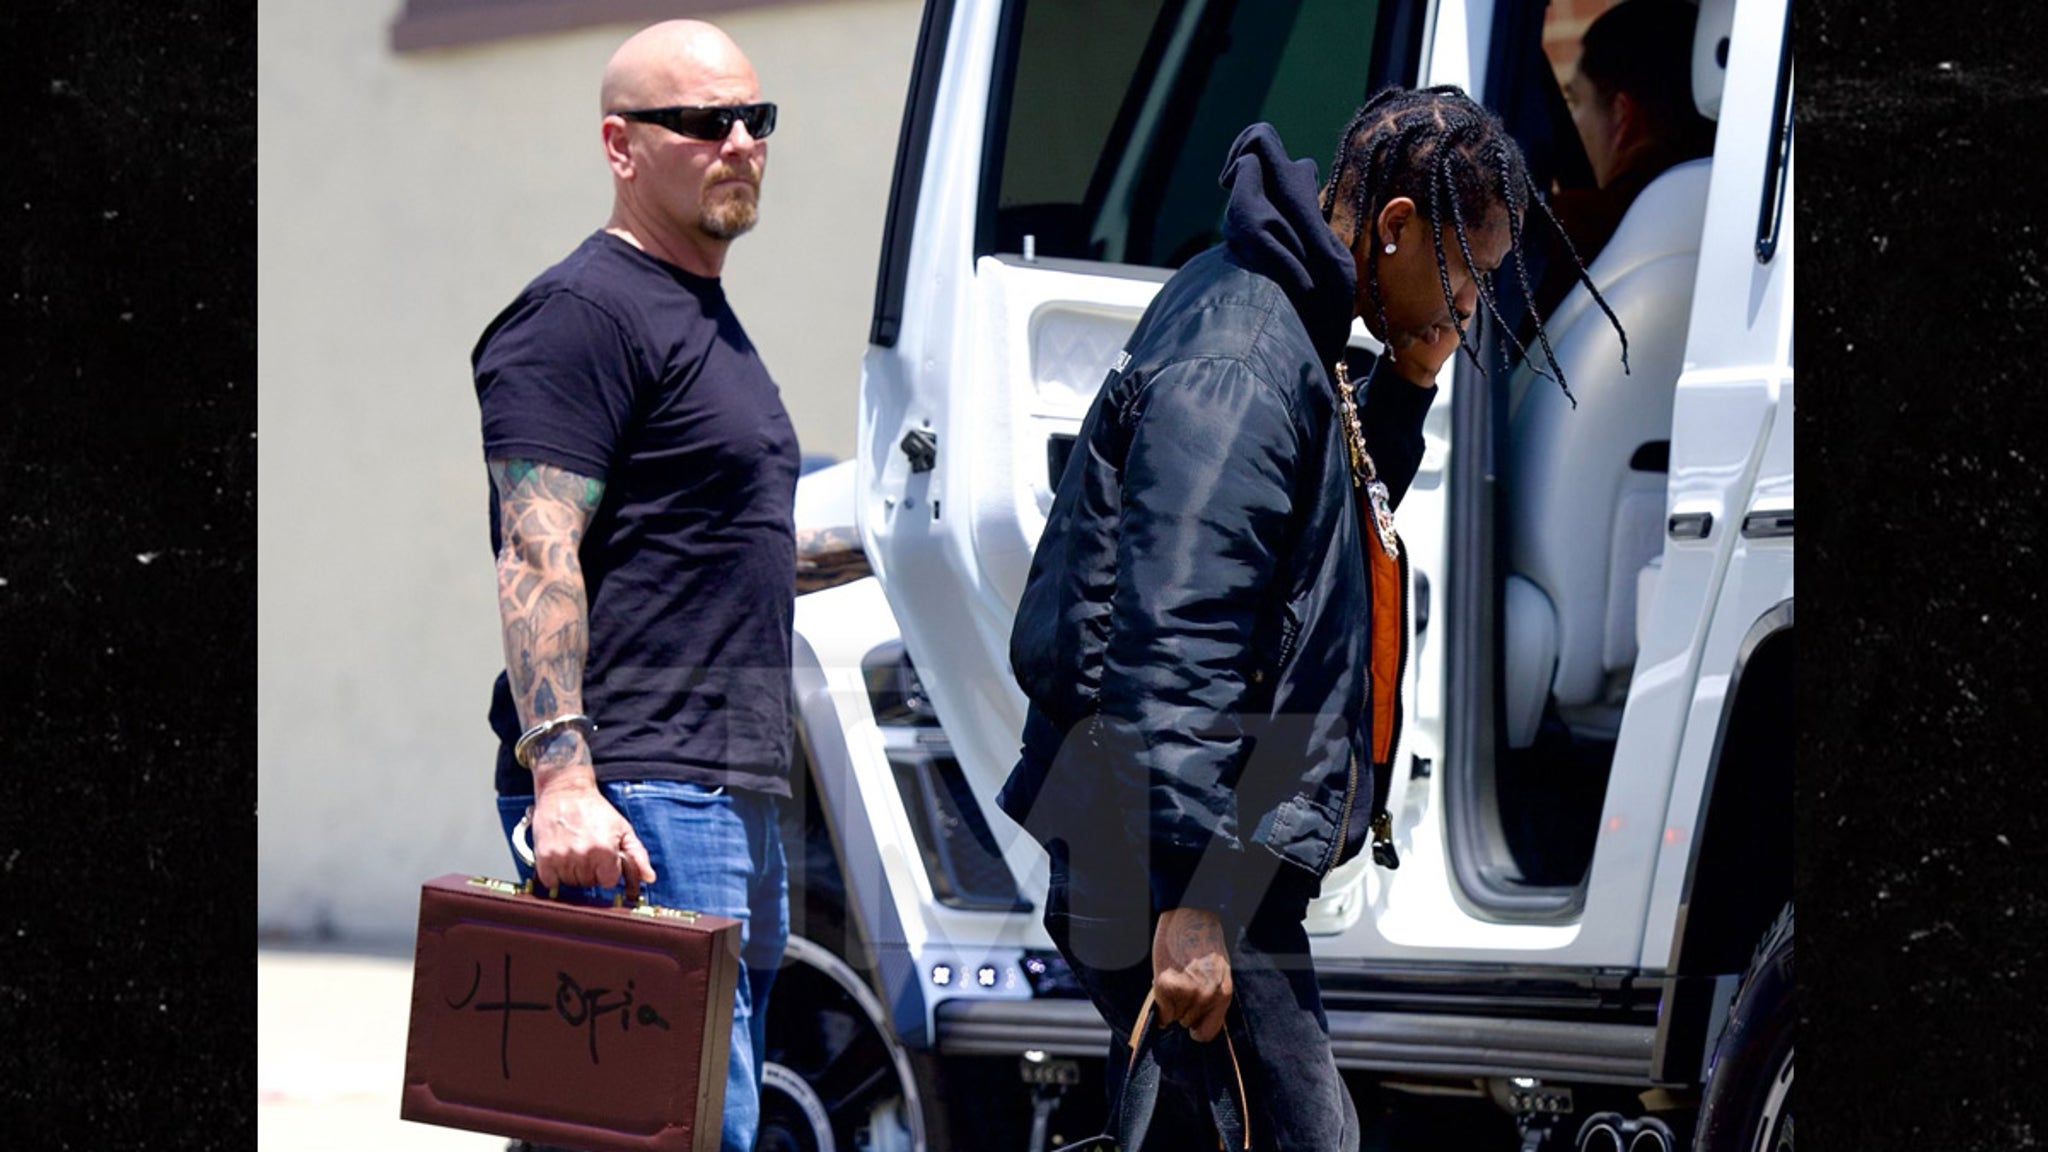 Travis Scott and the security guard seen with ‘Utopia’ album handcuffs on the wrists